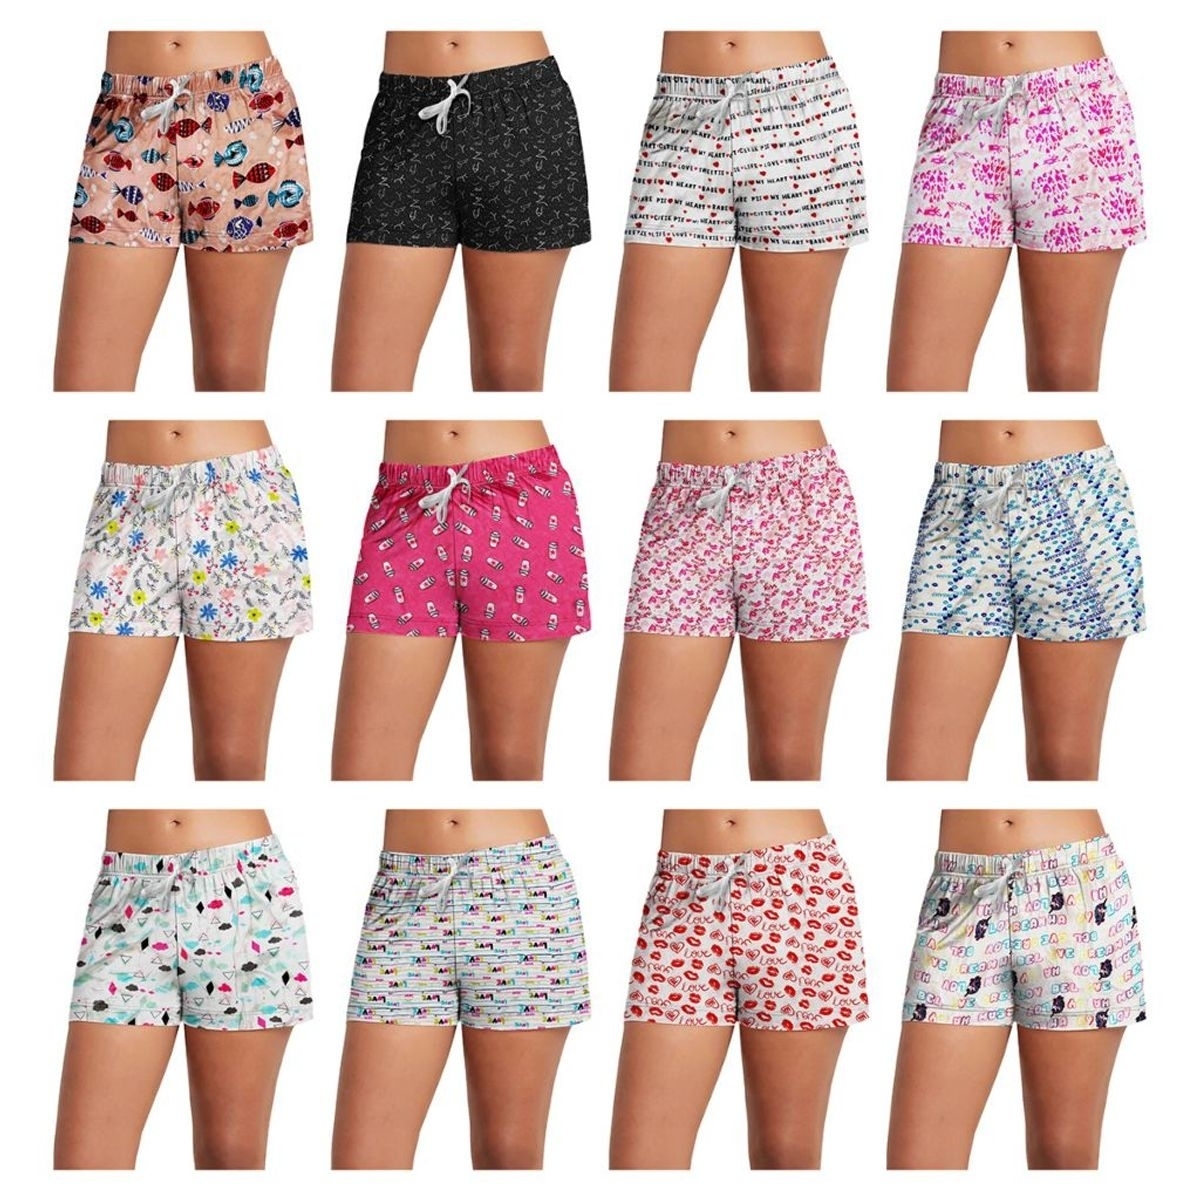 6-Pack: Women's Super-Soft Lightweight Fun Printed Comfy Lounge Bottom Pajama Shorts W/ Drawstring - Small, Shapes